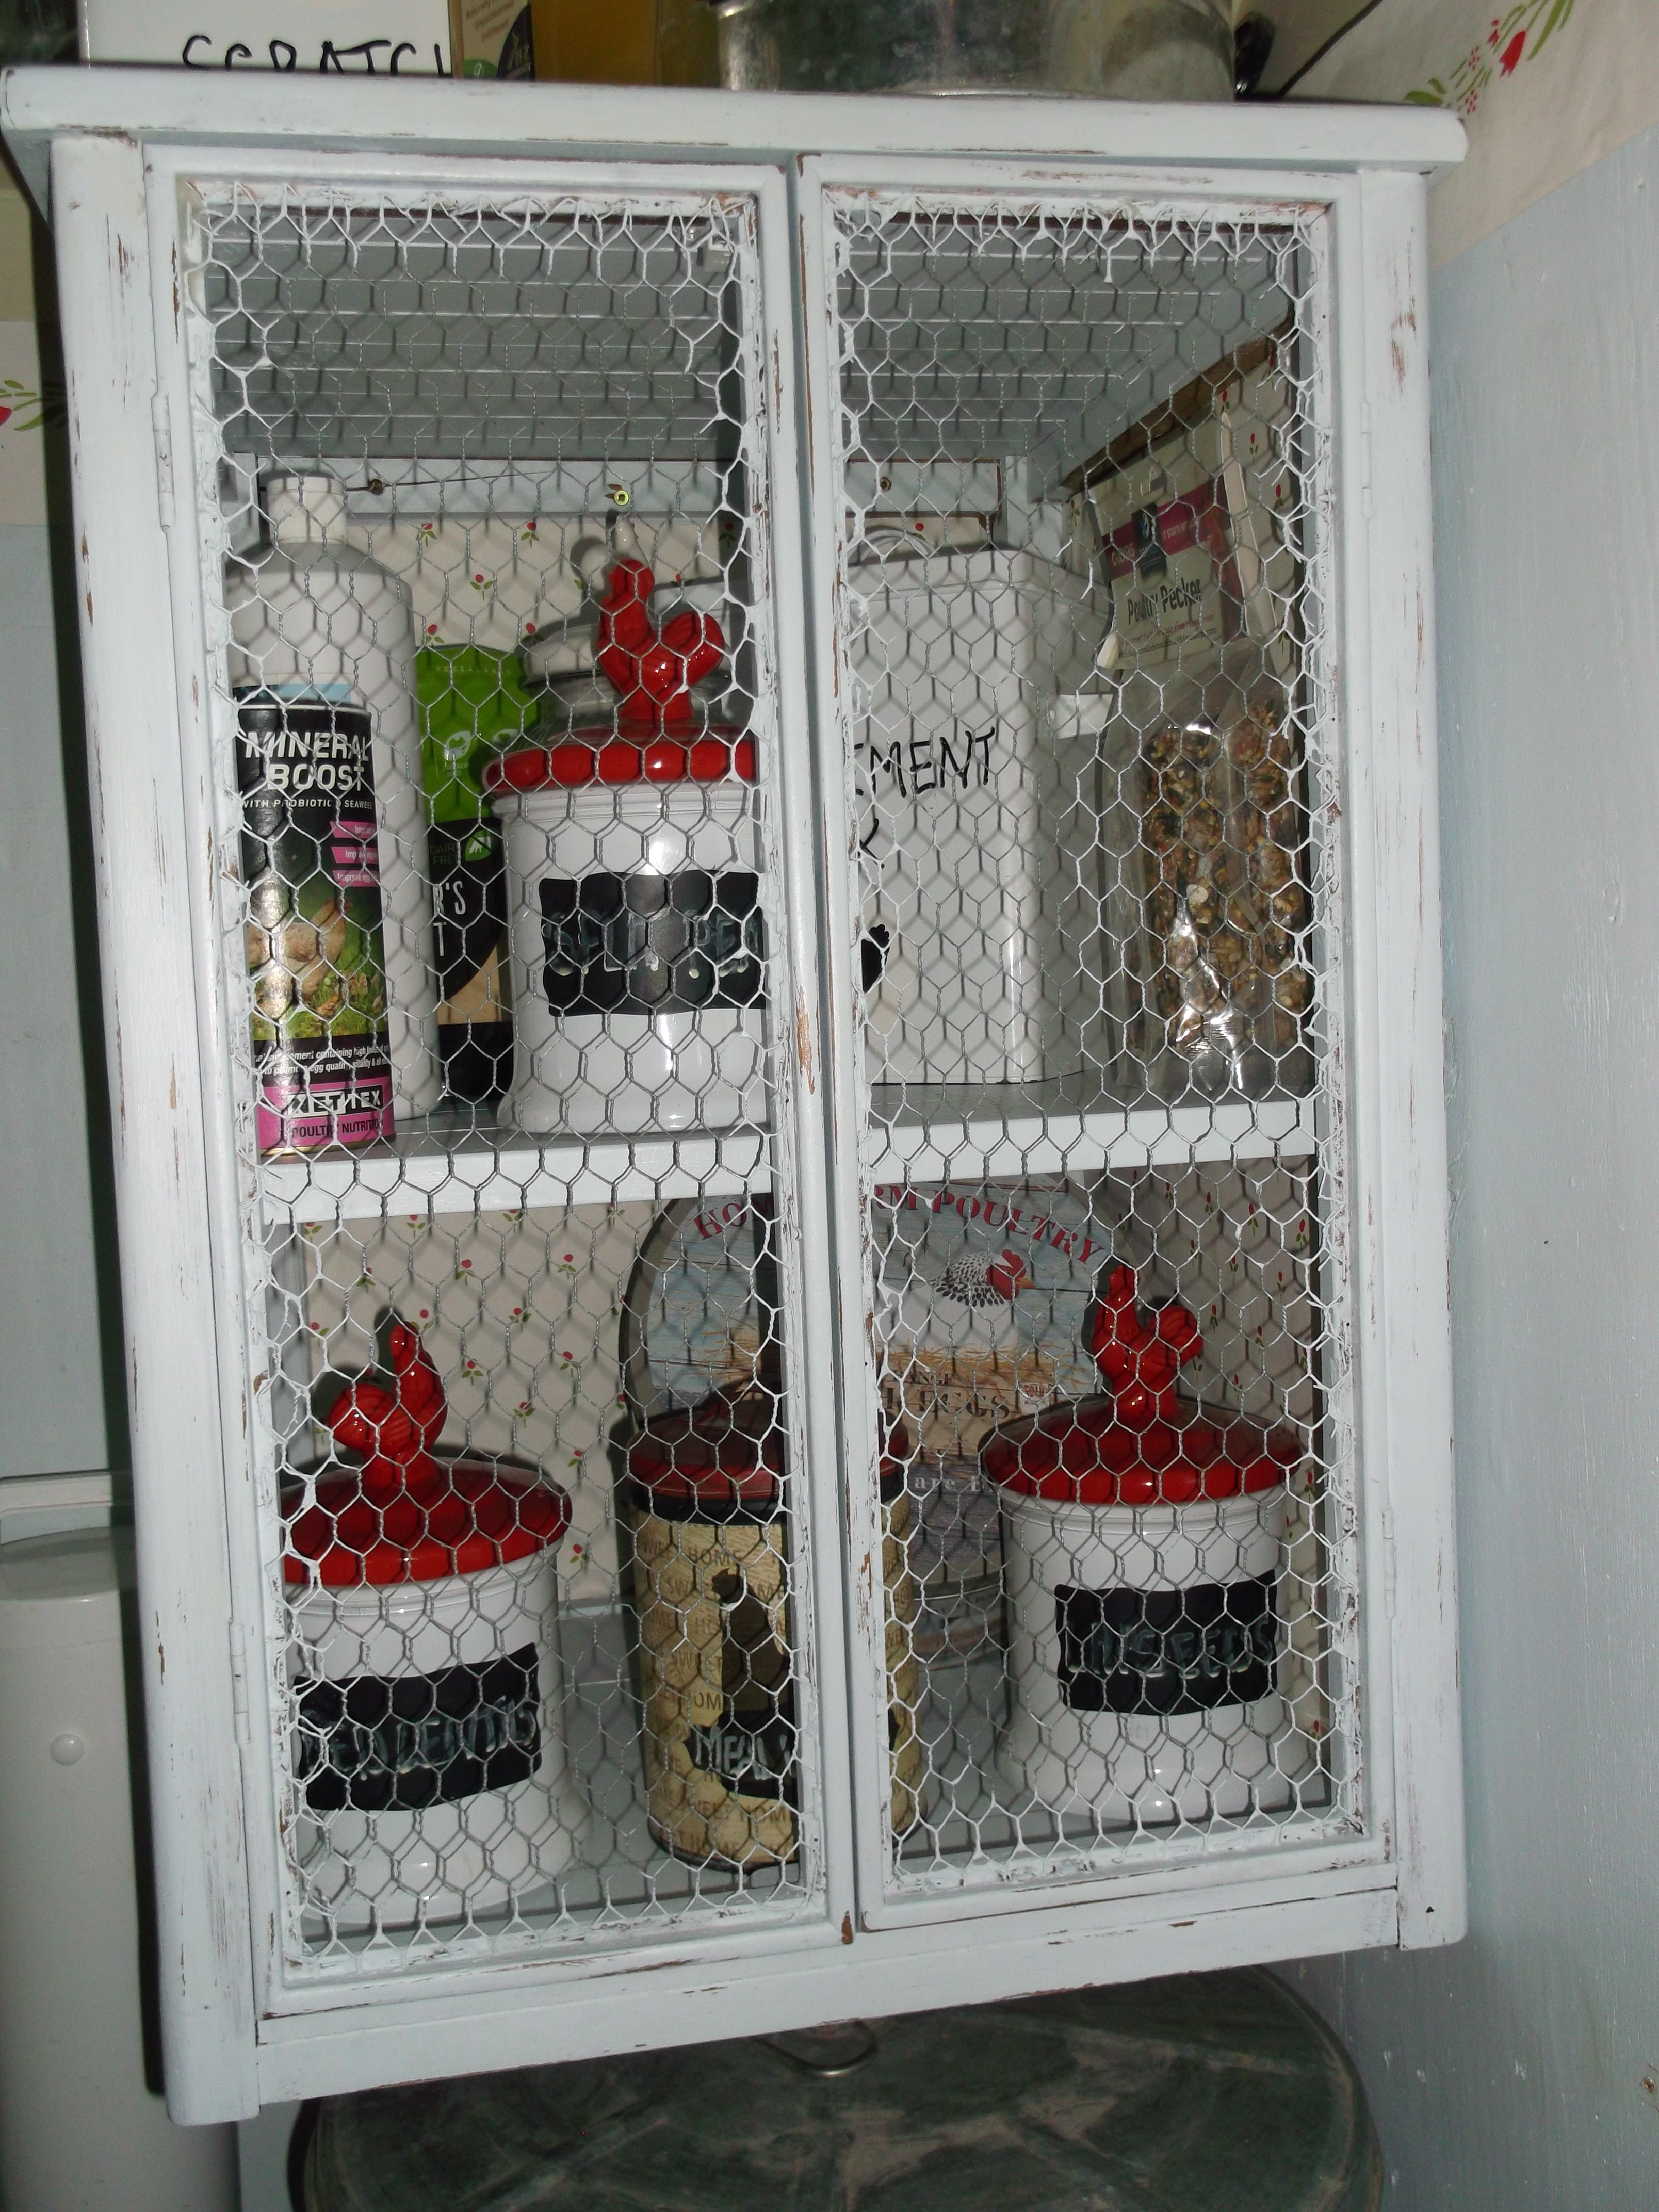 I ''upcycled'' another cupboard for storage in the coop